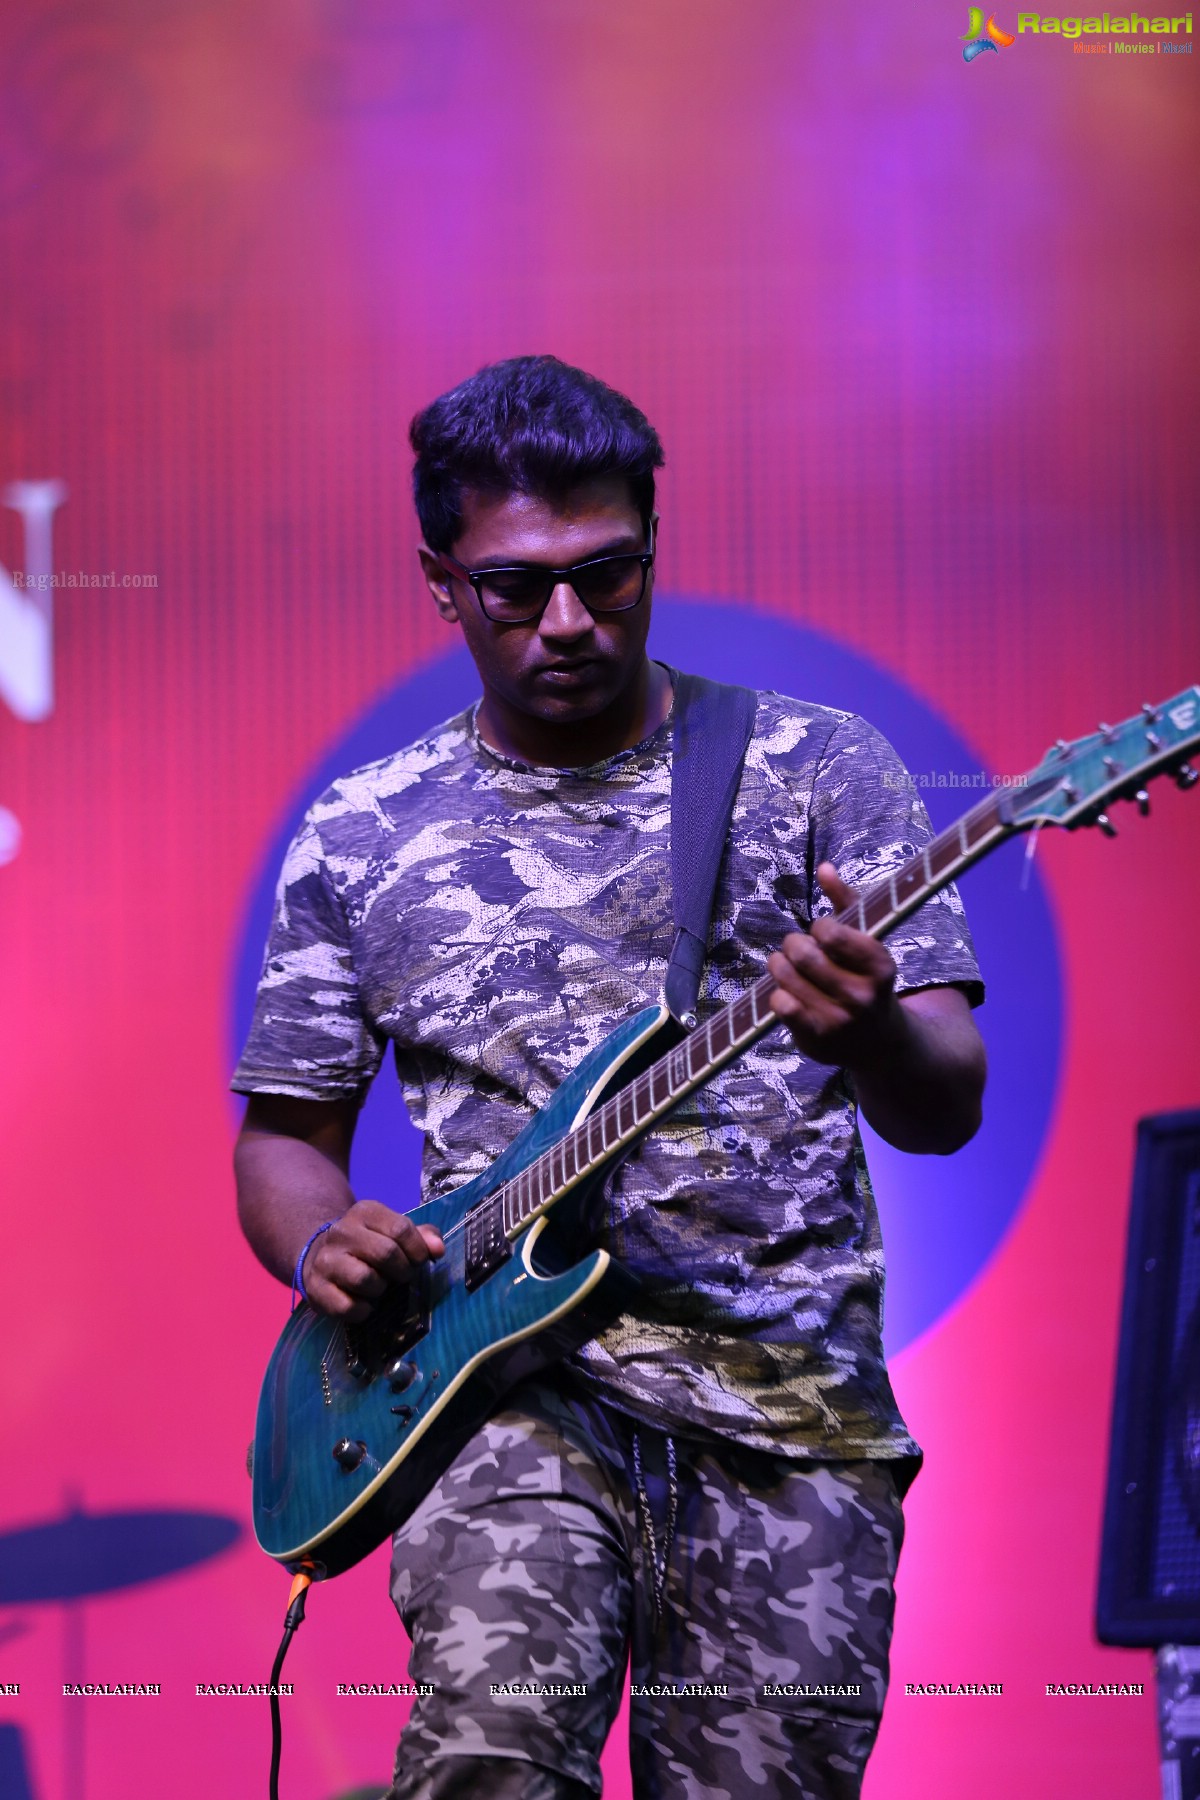 Forum Sujana Mall Introduces A Epic Battle of Bands 'Forum Rock On'